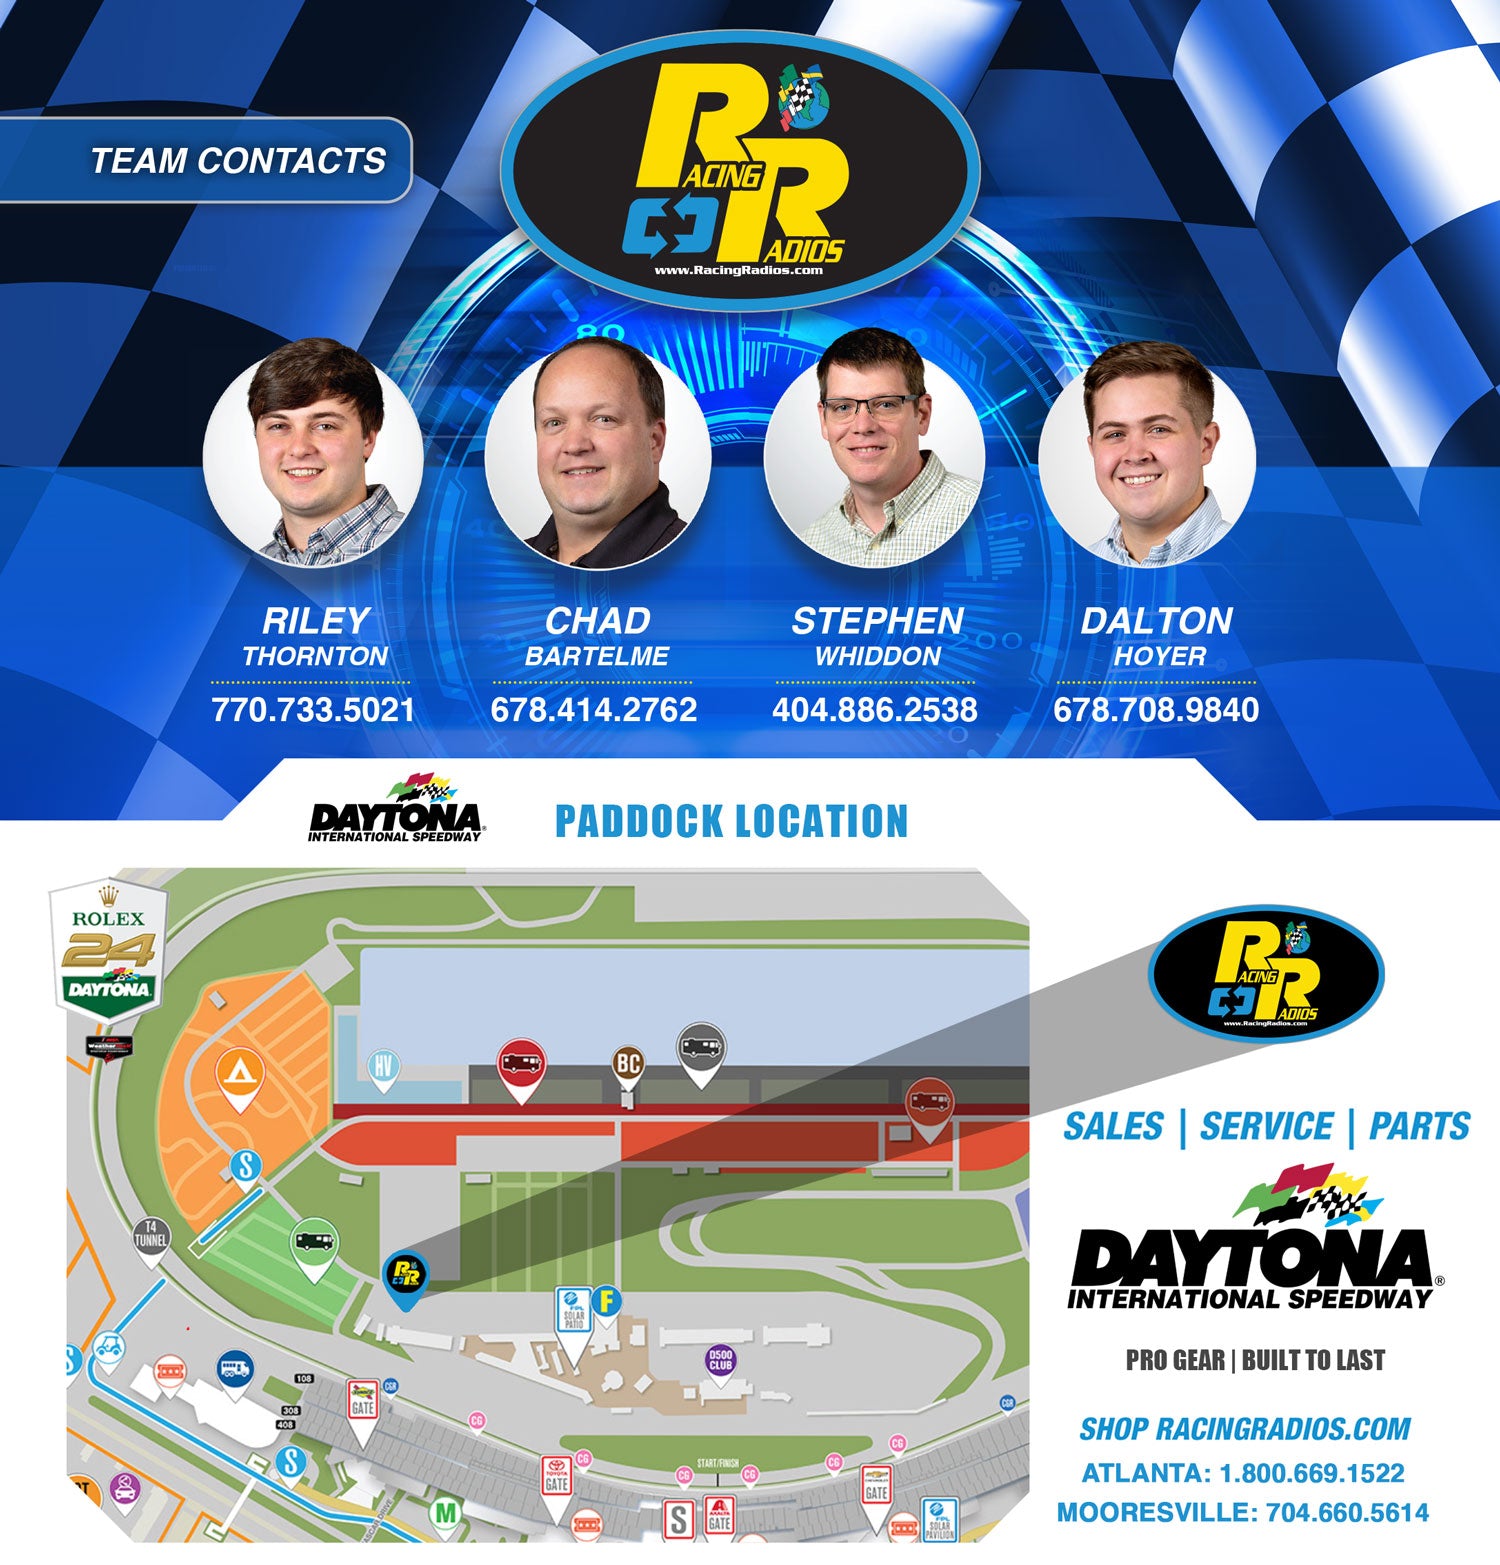 Rolex 24 Racing Radios Vendor Sales & Support | The Leader In Racing Radio Two-Way Communication